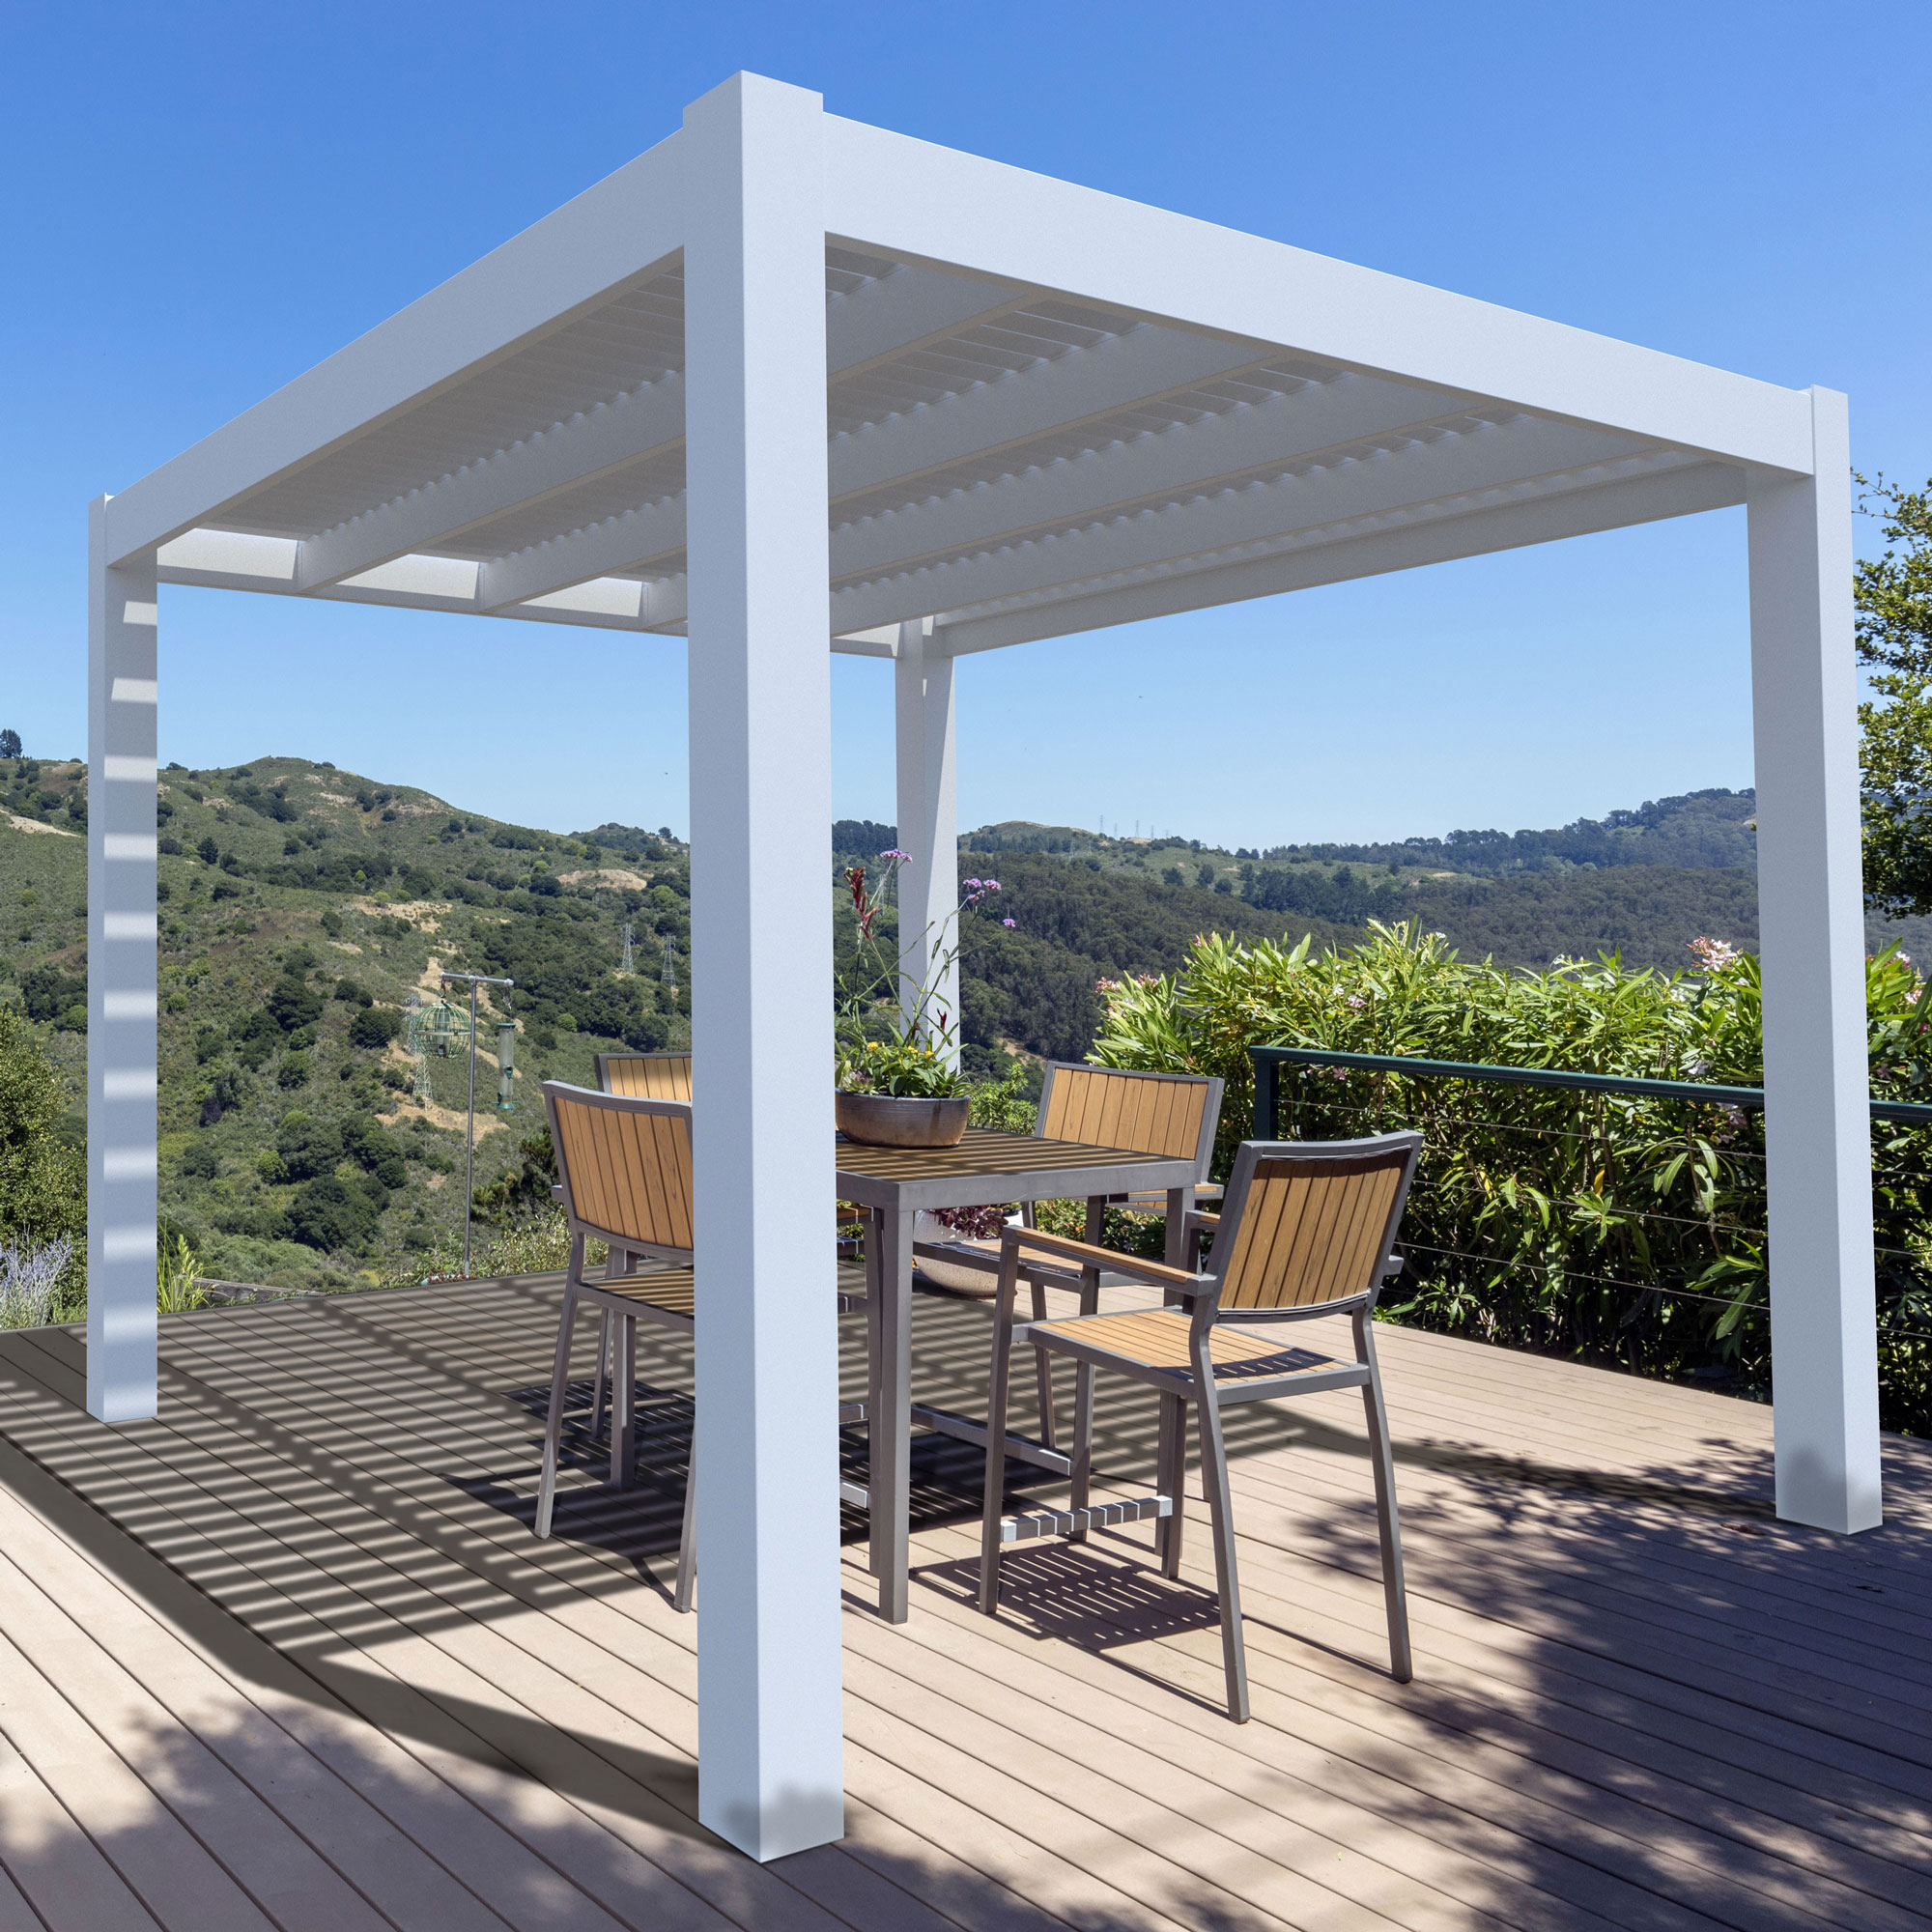 A modern pergola with white siding is covering an outdoor eating area. It overlooks a valley.